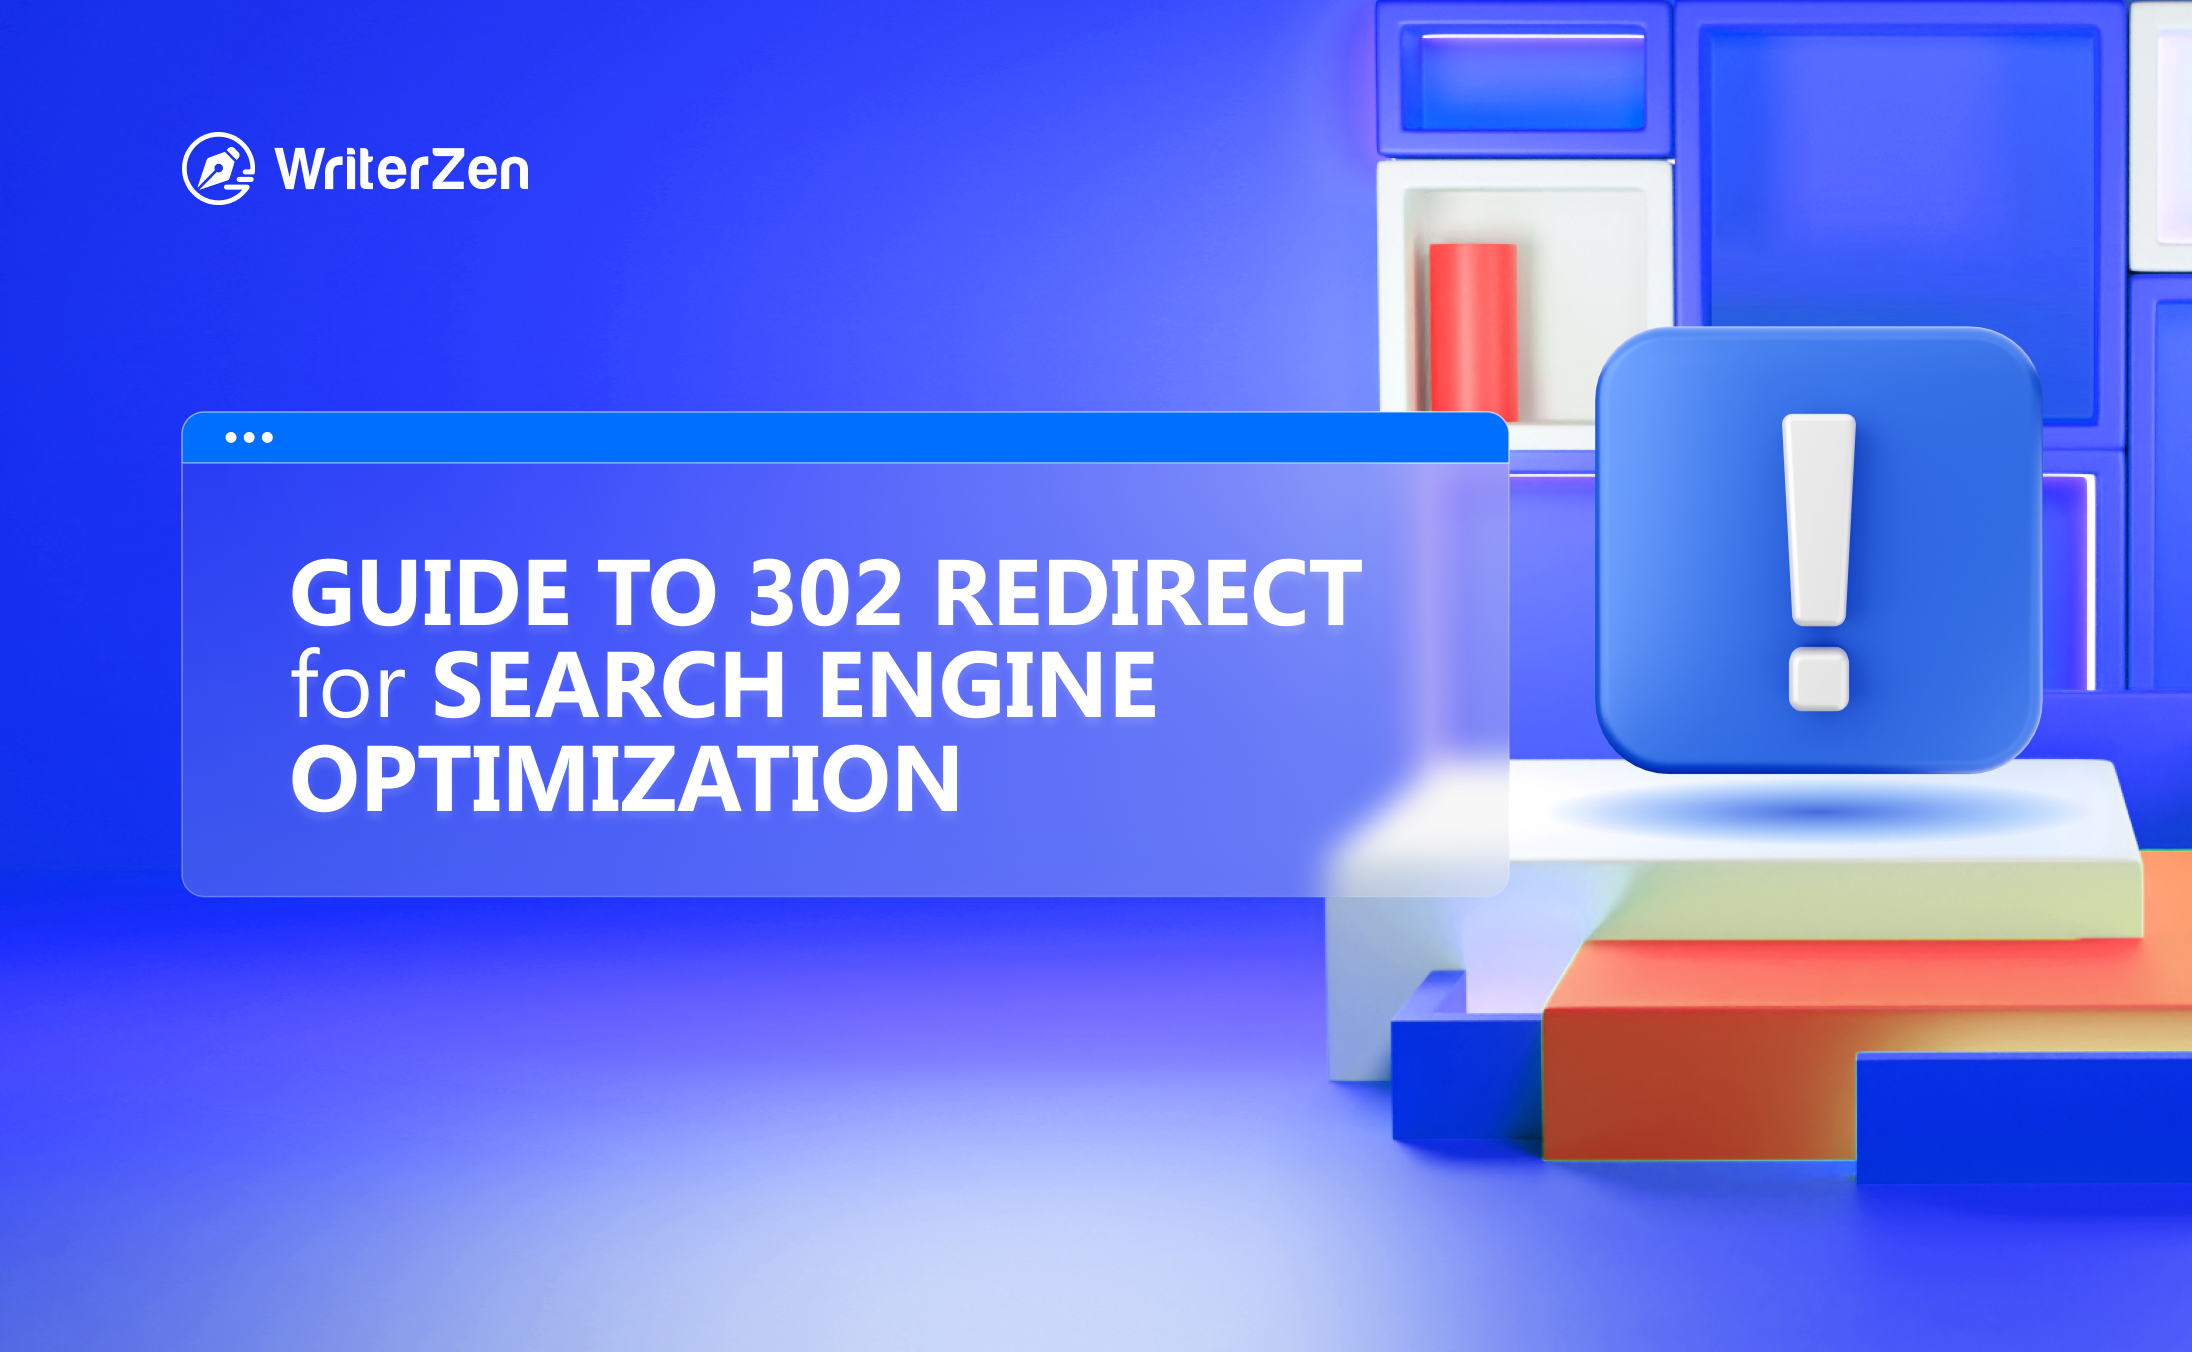 /storage/photos/1/blog-5.44/guide-to-302-redirect-for-search-engine-optimization.webp